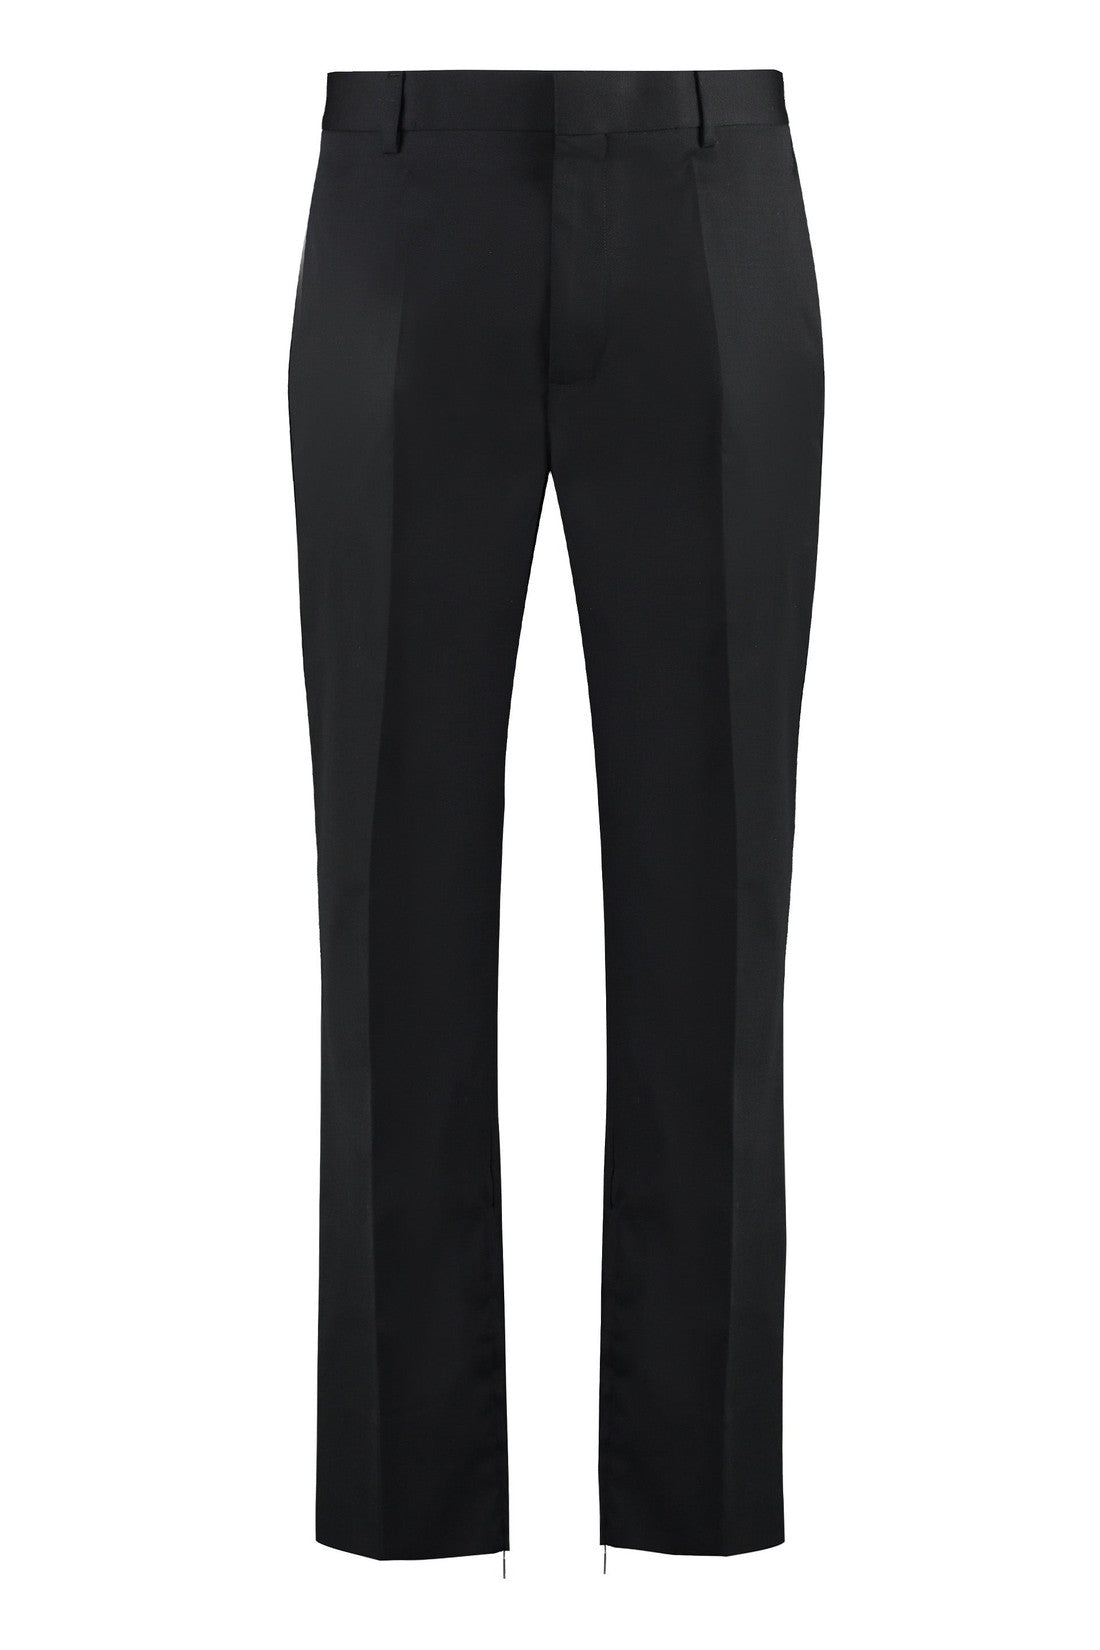 Off-White-OUTLET-SALE-Virgin wool trousers-ARCHIVIST